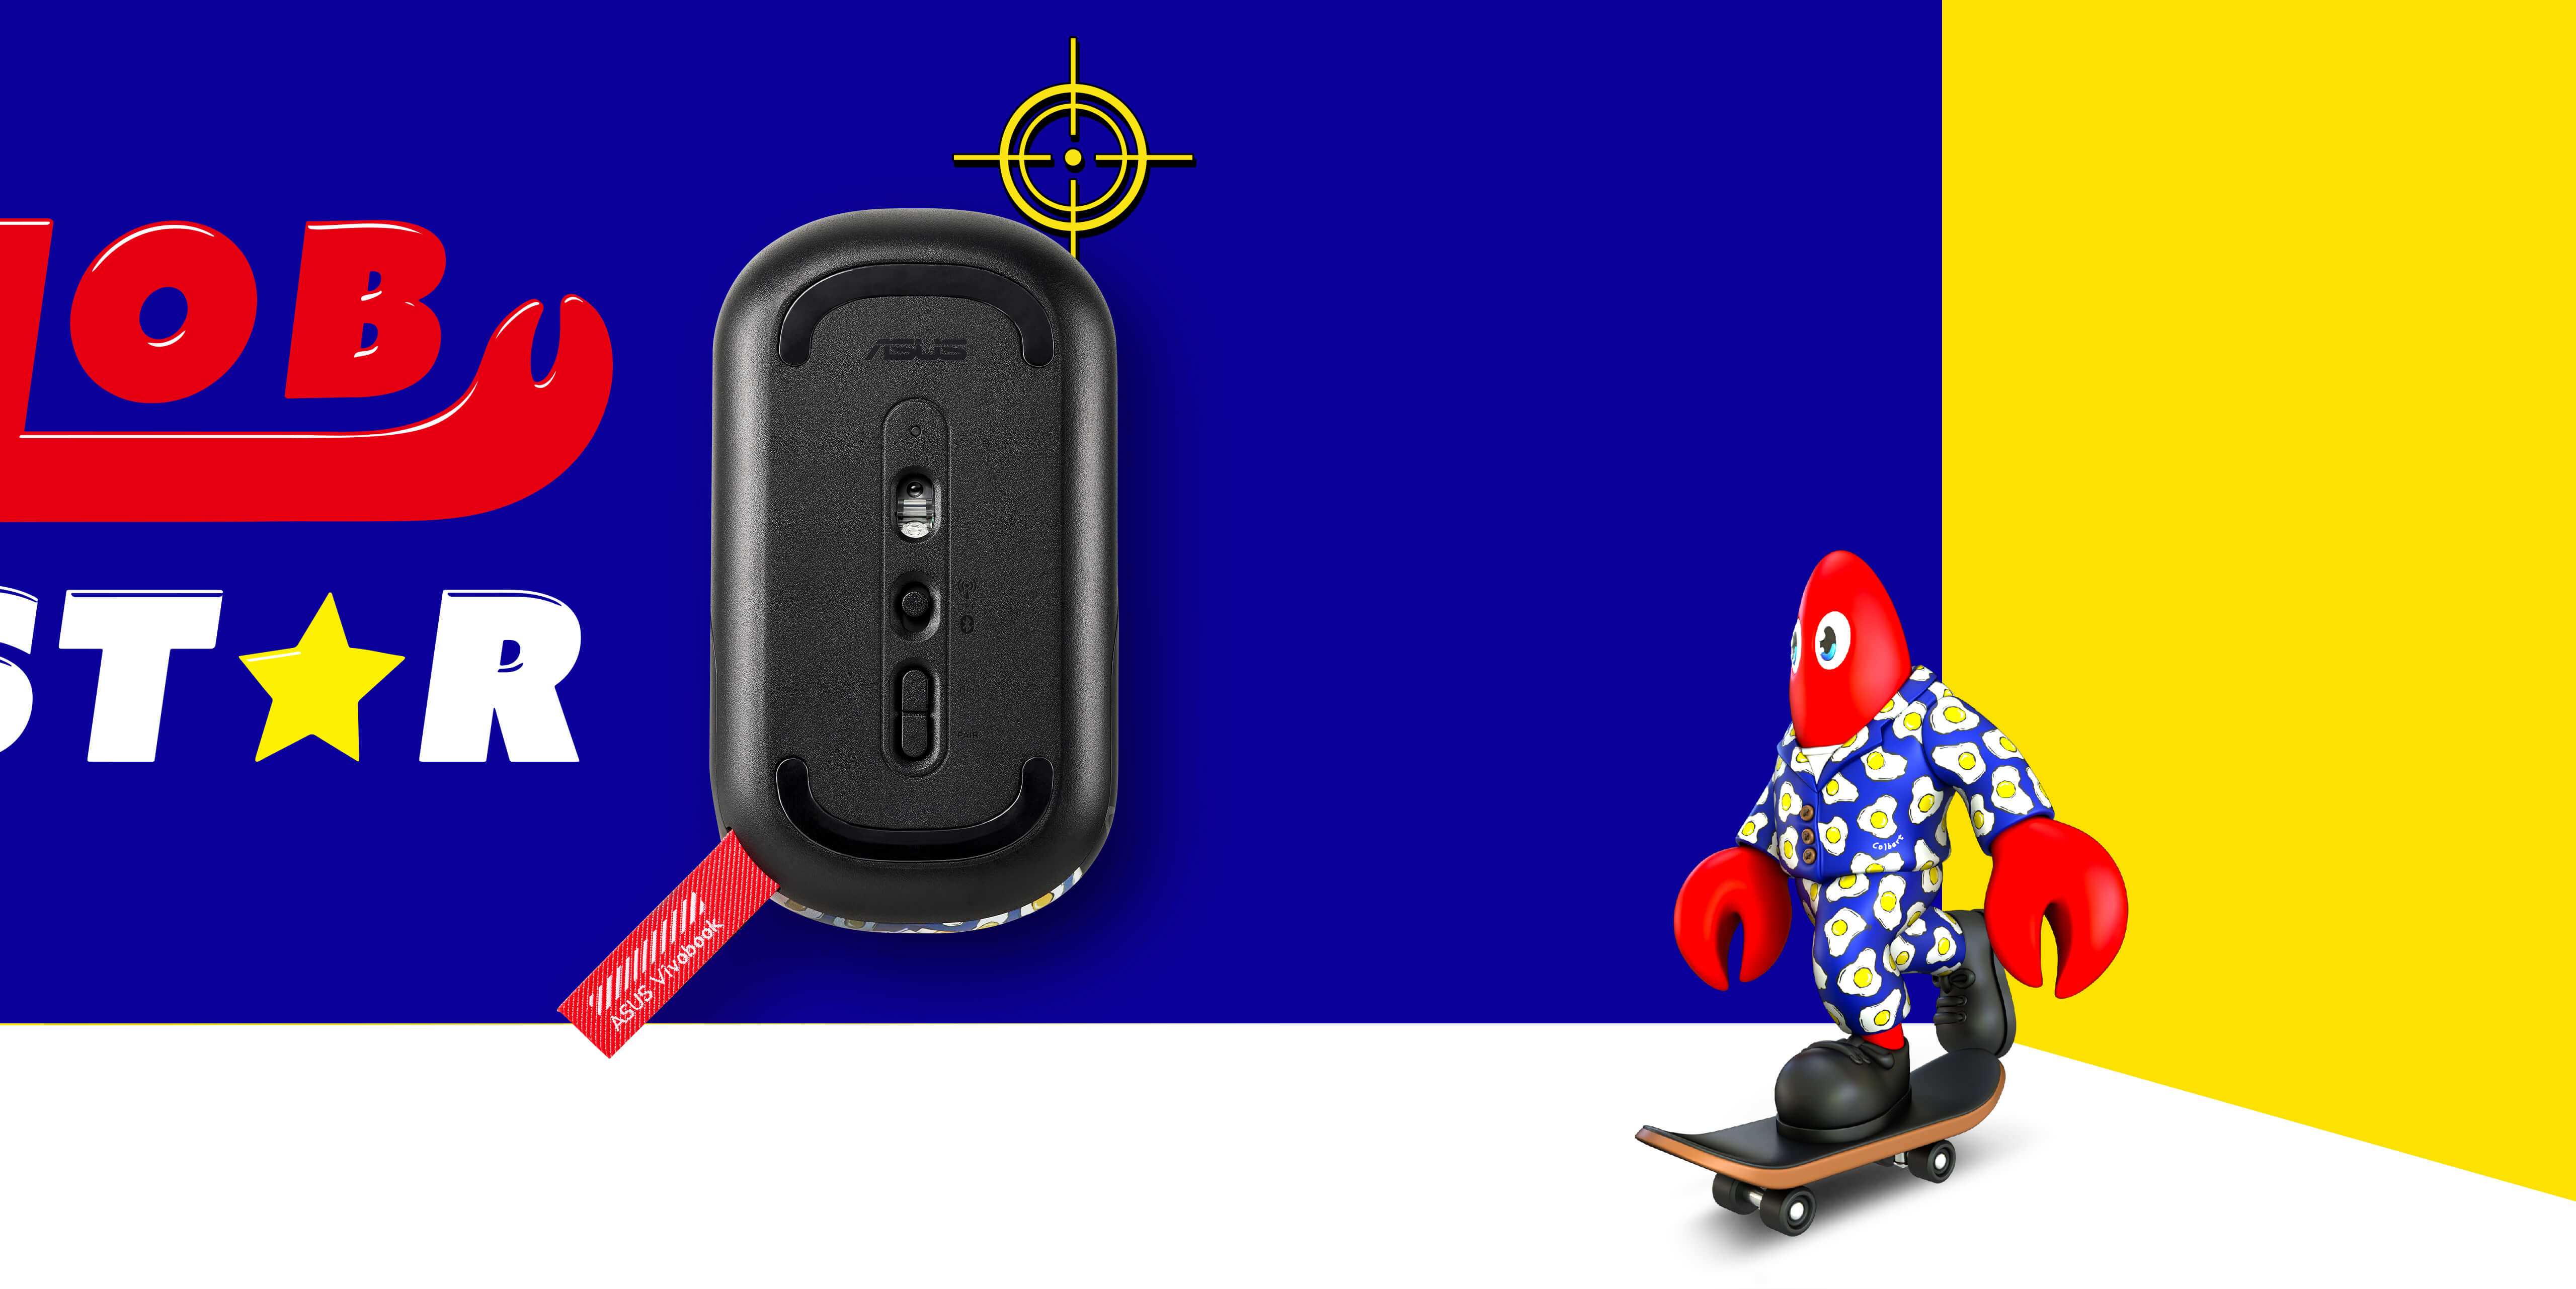 An image of the underside of MD100 Philip Colbert Edition to show the mouse feet, optical sensor, and DPI button. A lobster figure on a skateboard is shown in the background.